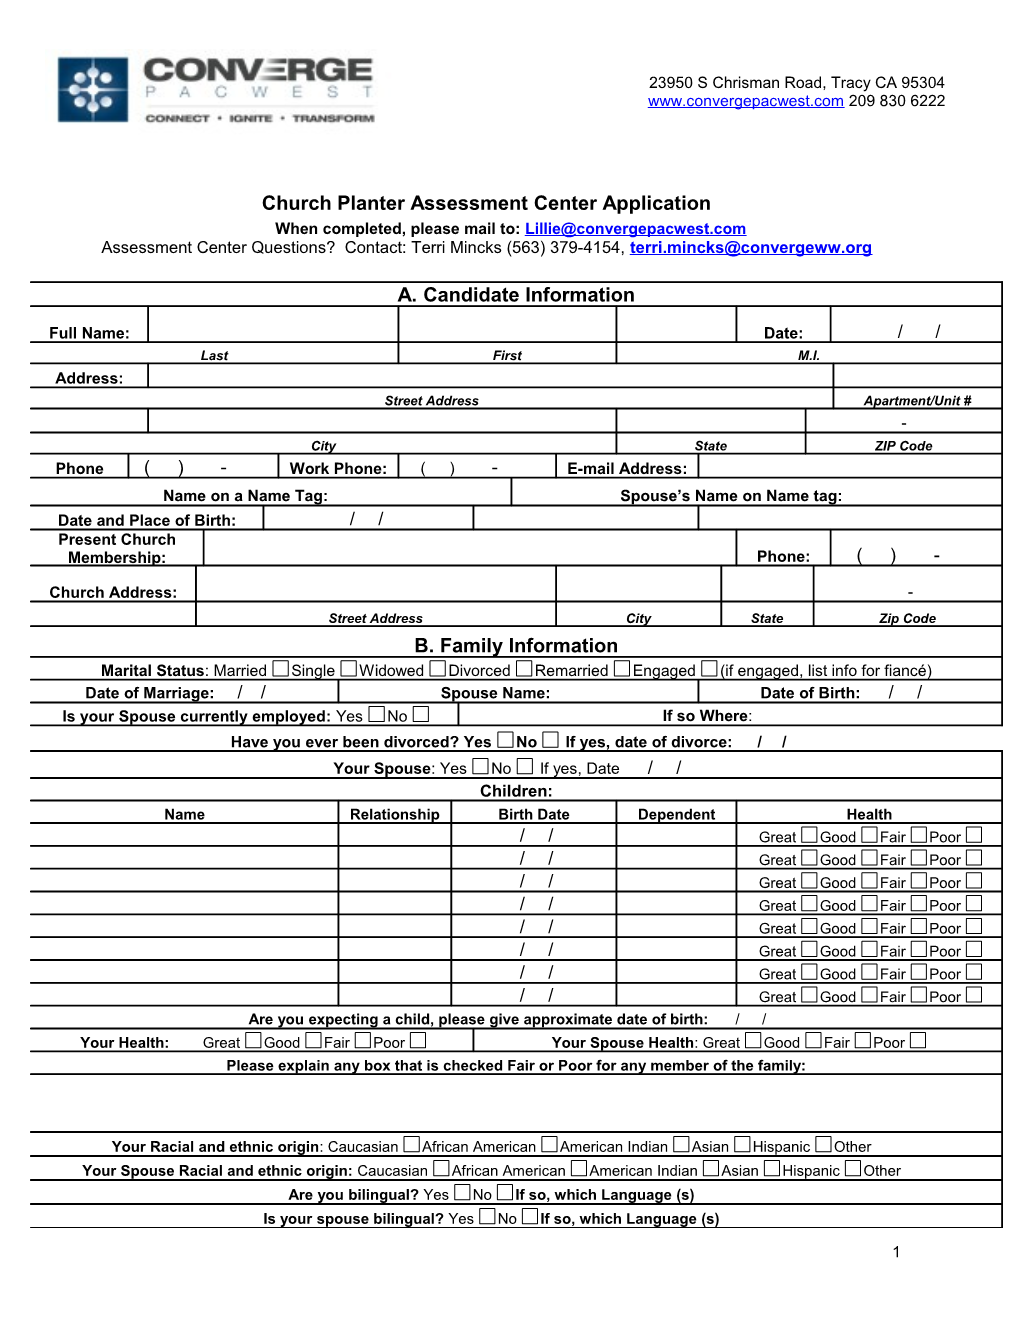 Midwest Church Planting Information Form for Assessment Center